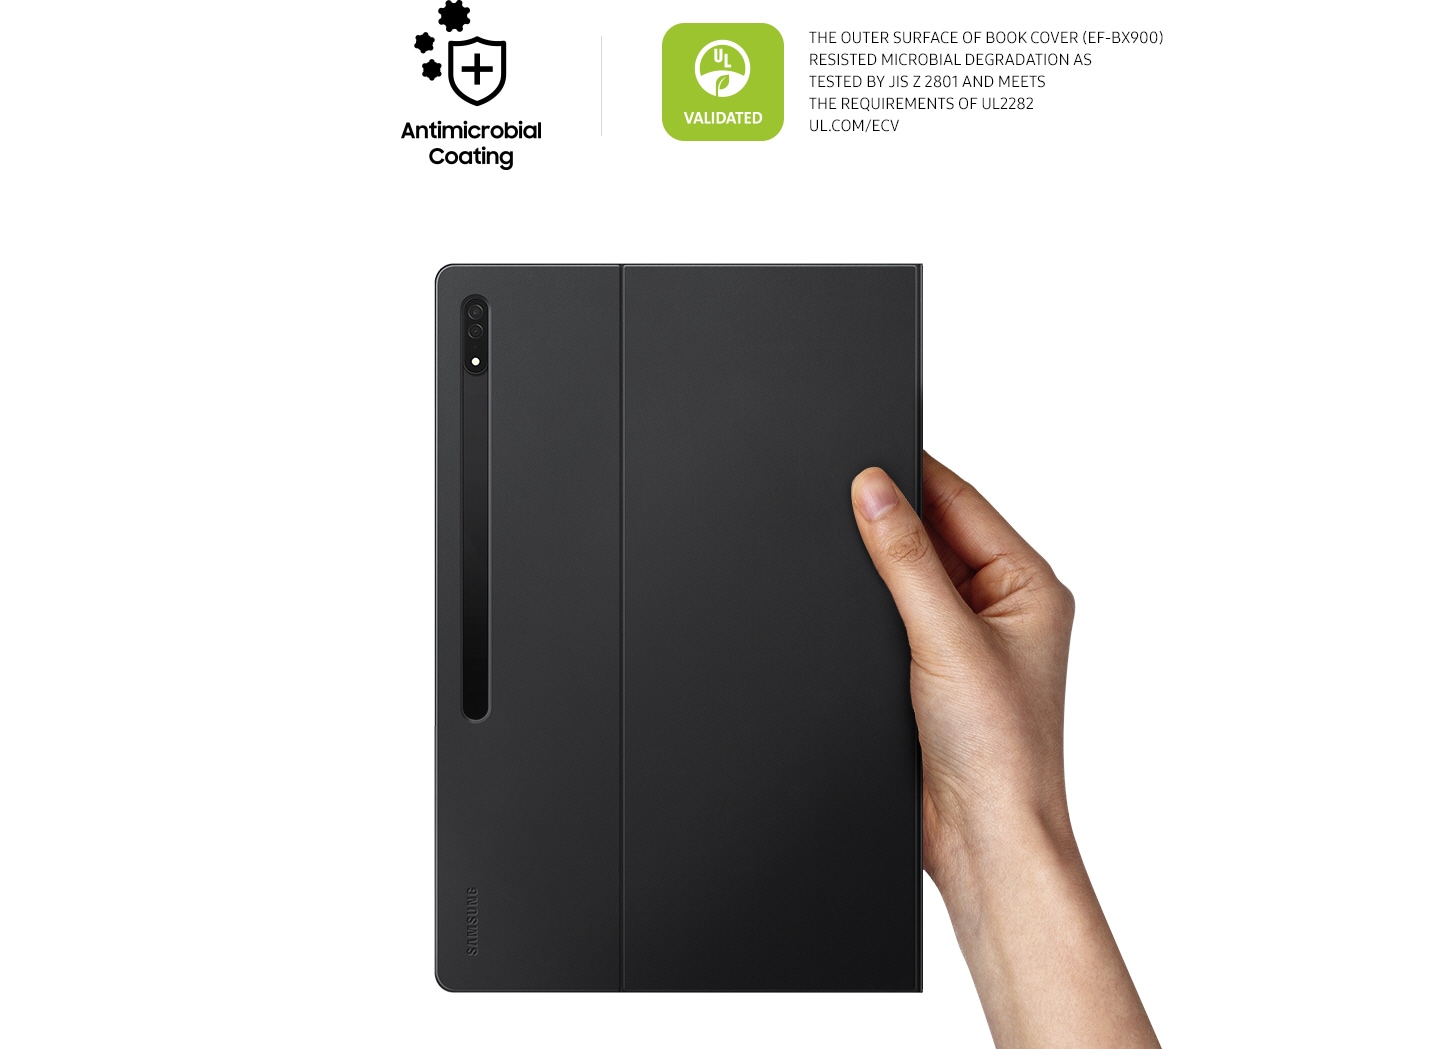 A person holding the Galaxy Tab S8 Ultra Book Cover with one hand. you can see the Antimicrobial Coating and VALIDATED logos. The VALIDATED logo states †THE OUTER SURFACE OF BOOK COVER (EF-BX900) RESISTED MICROBIAL DEGRADATION AS TESTED BY JIS Z 2801 AND MEETS THE REQUIREMENTS OF UL2282. UL.COM/ECV